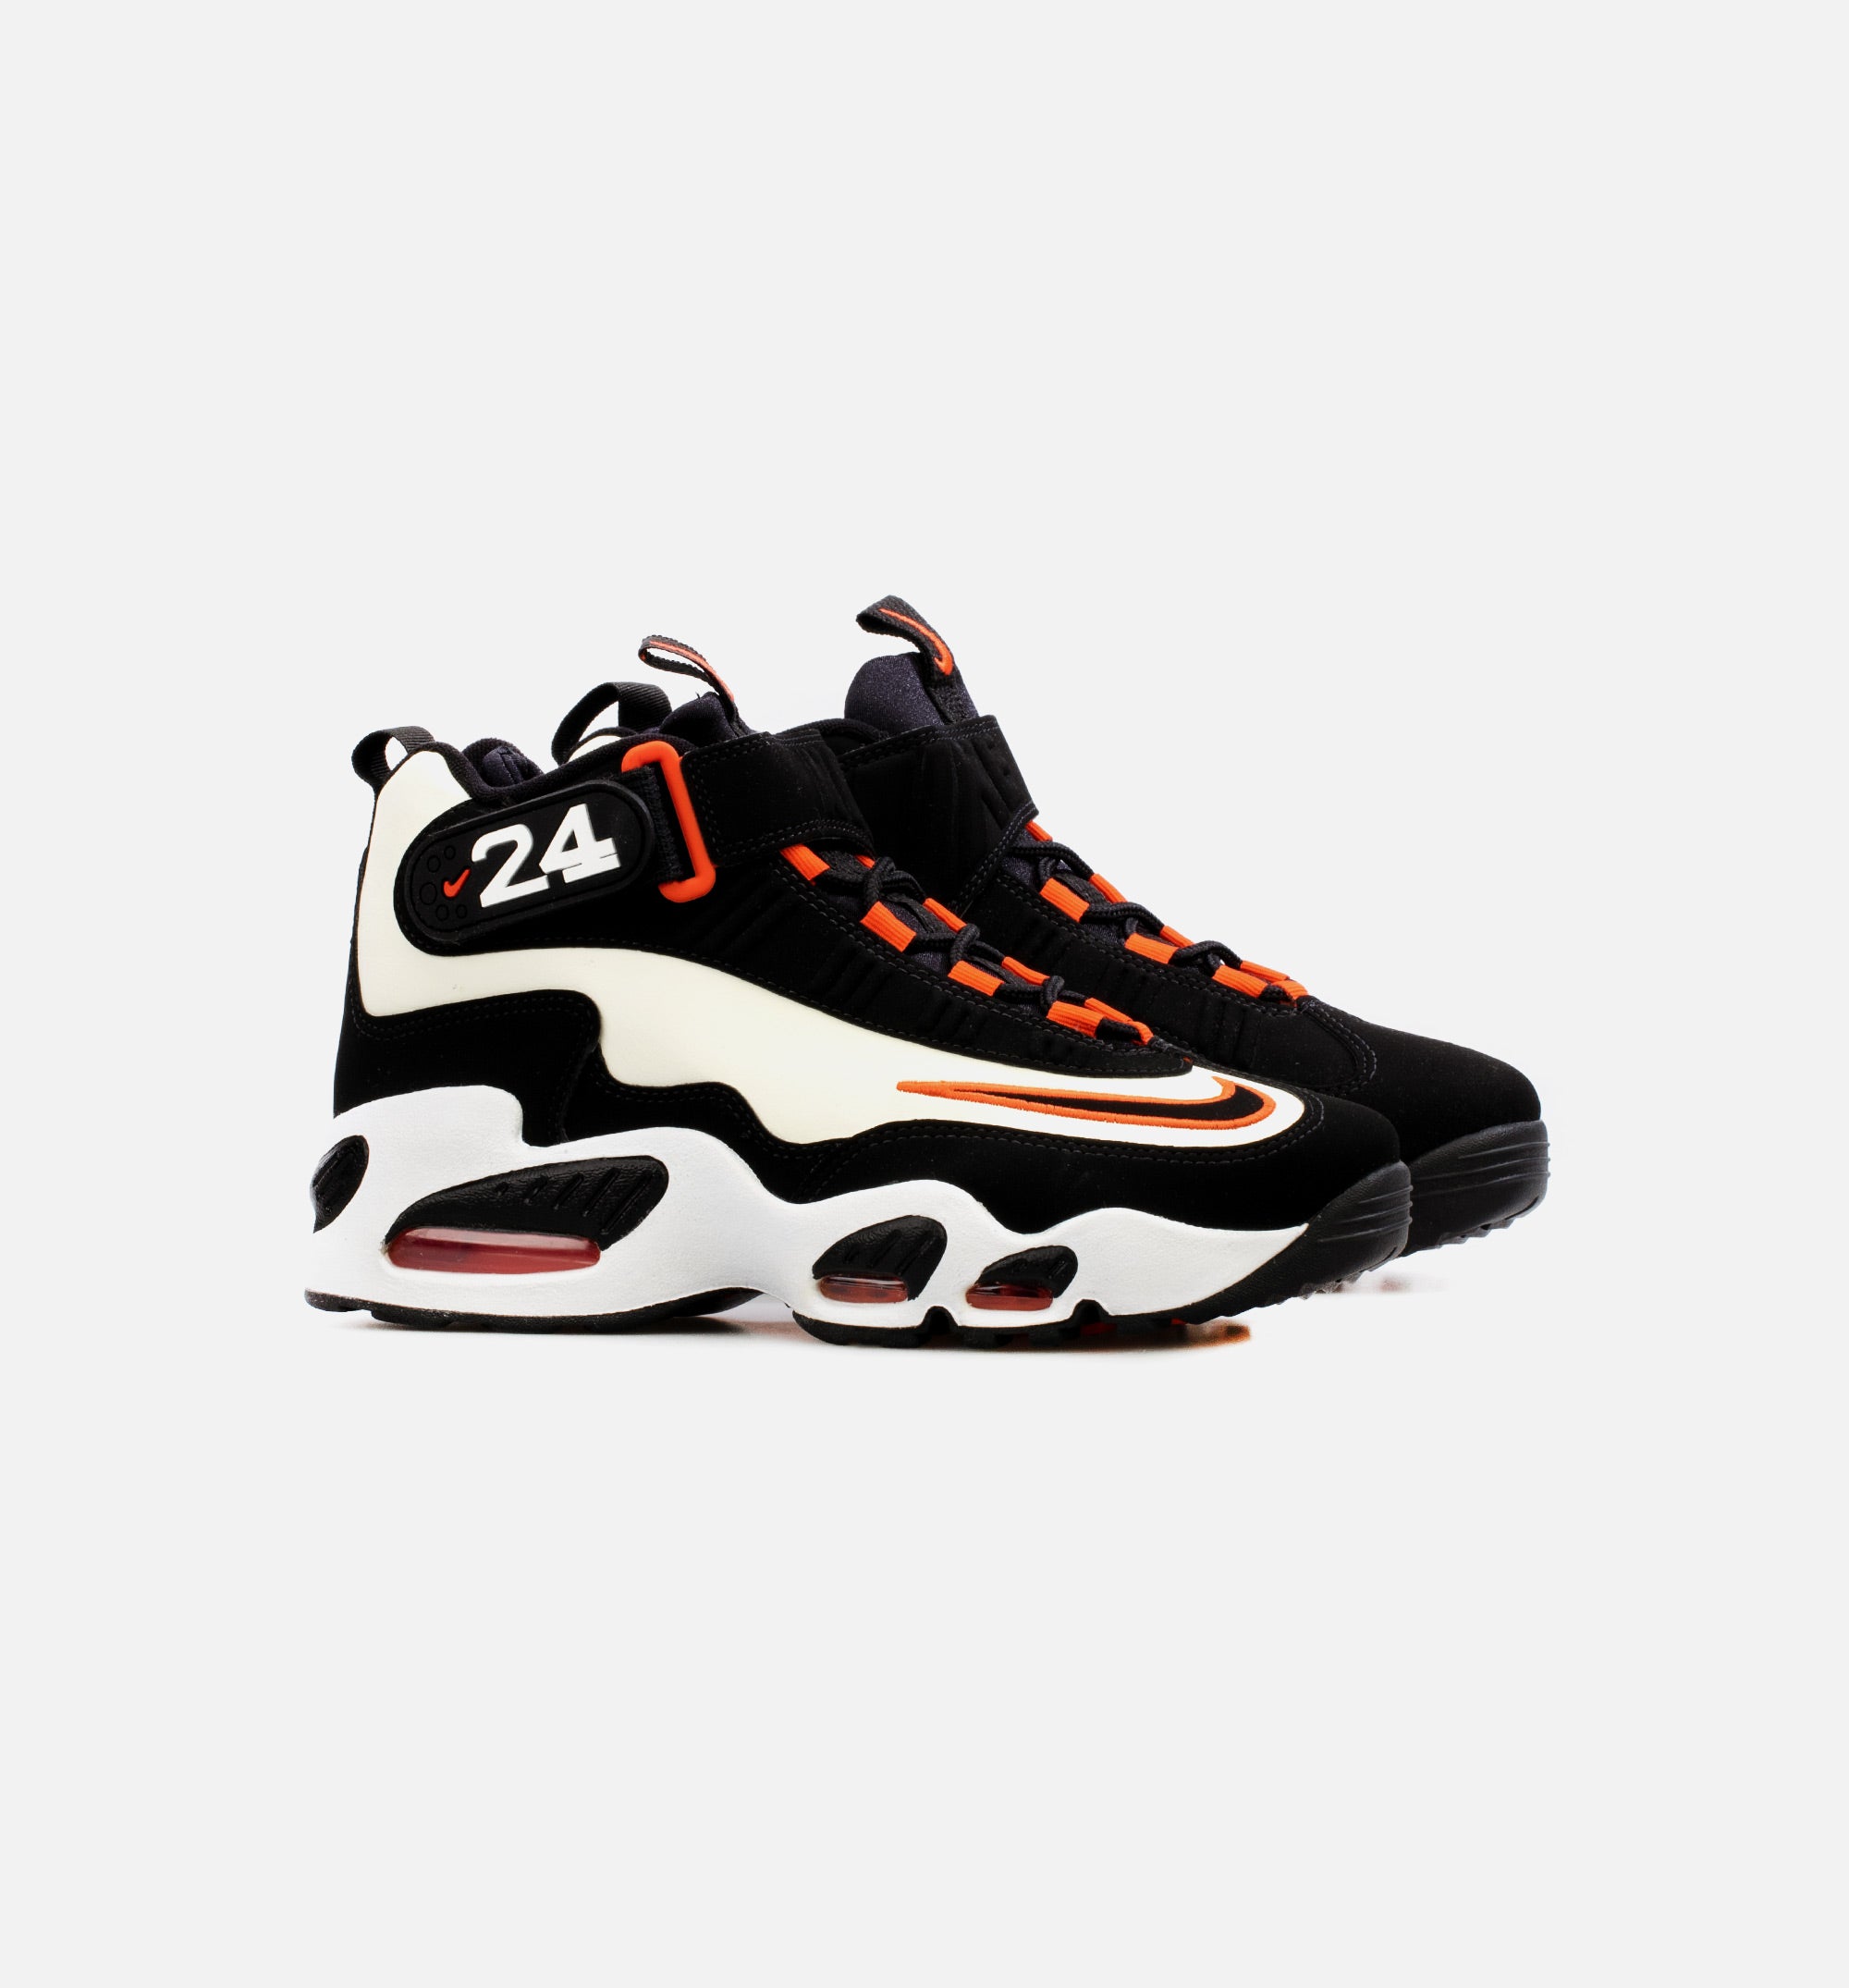 Nike Men's Air Griffey Max 1 Los Angeles Shoes - Black / Concord / Yel —  Just For Sports